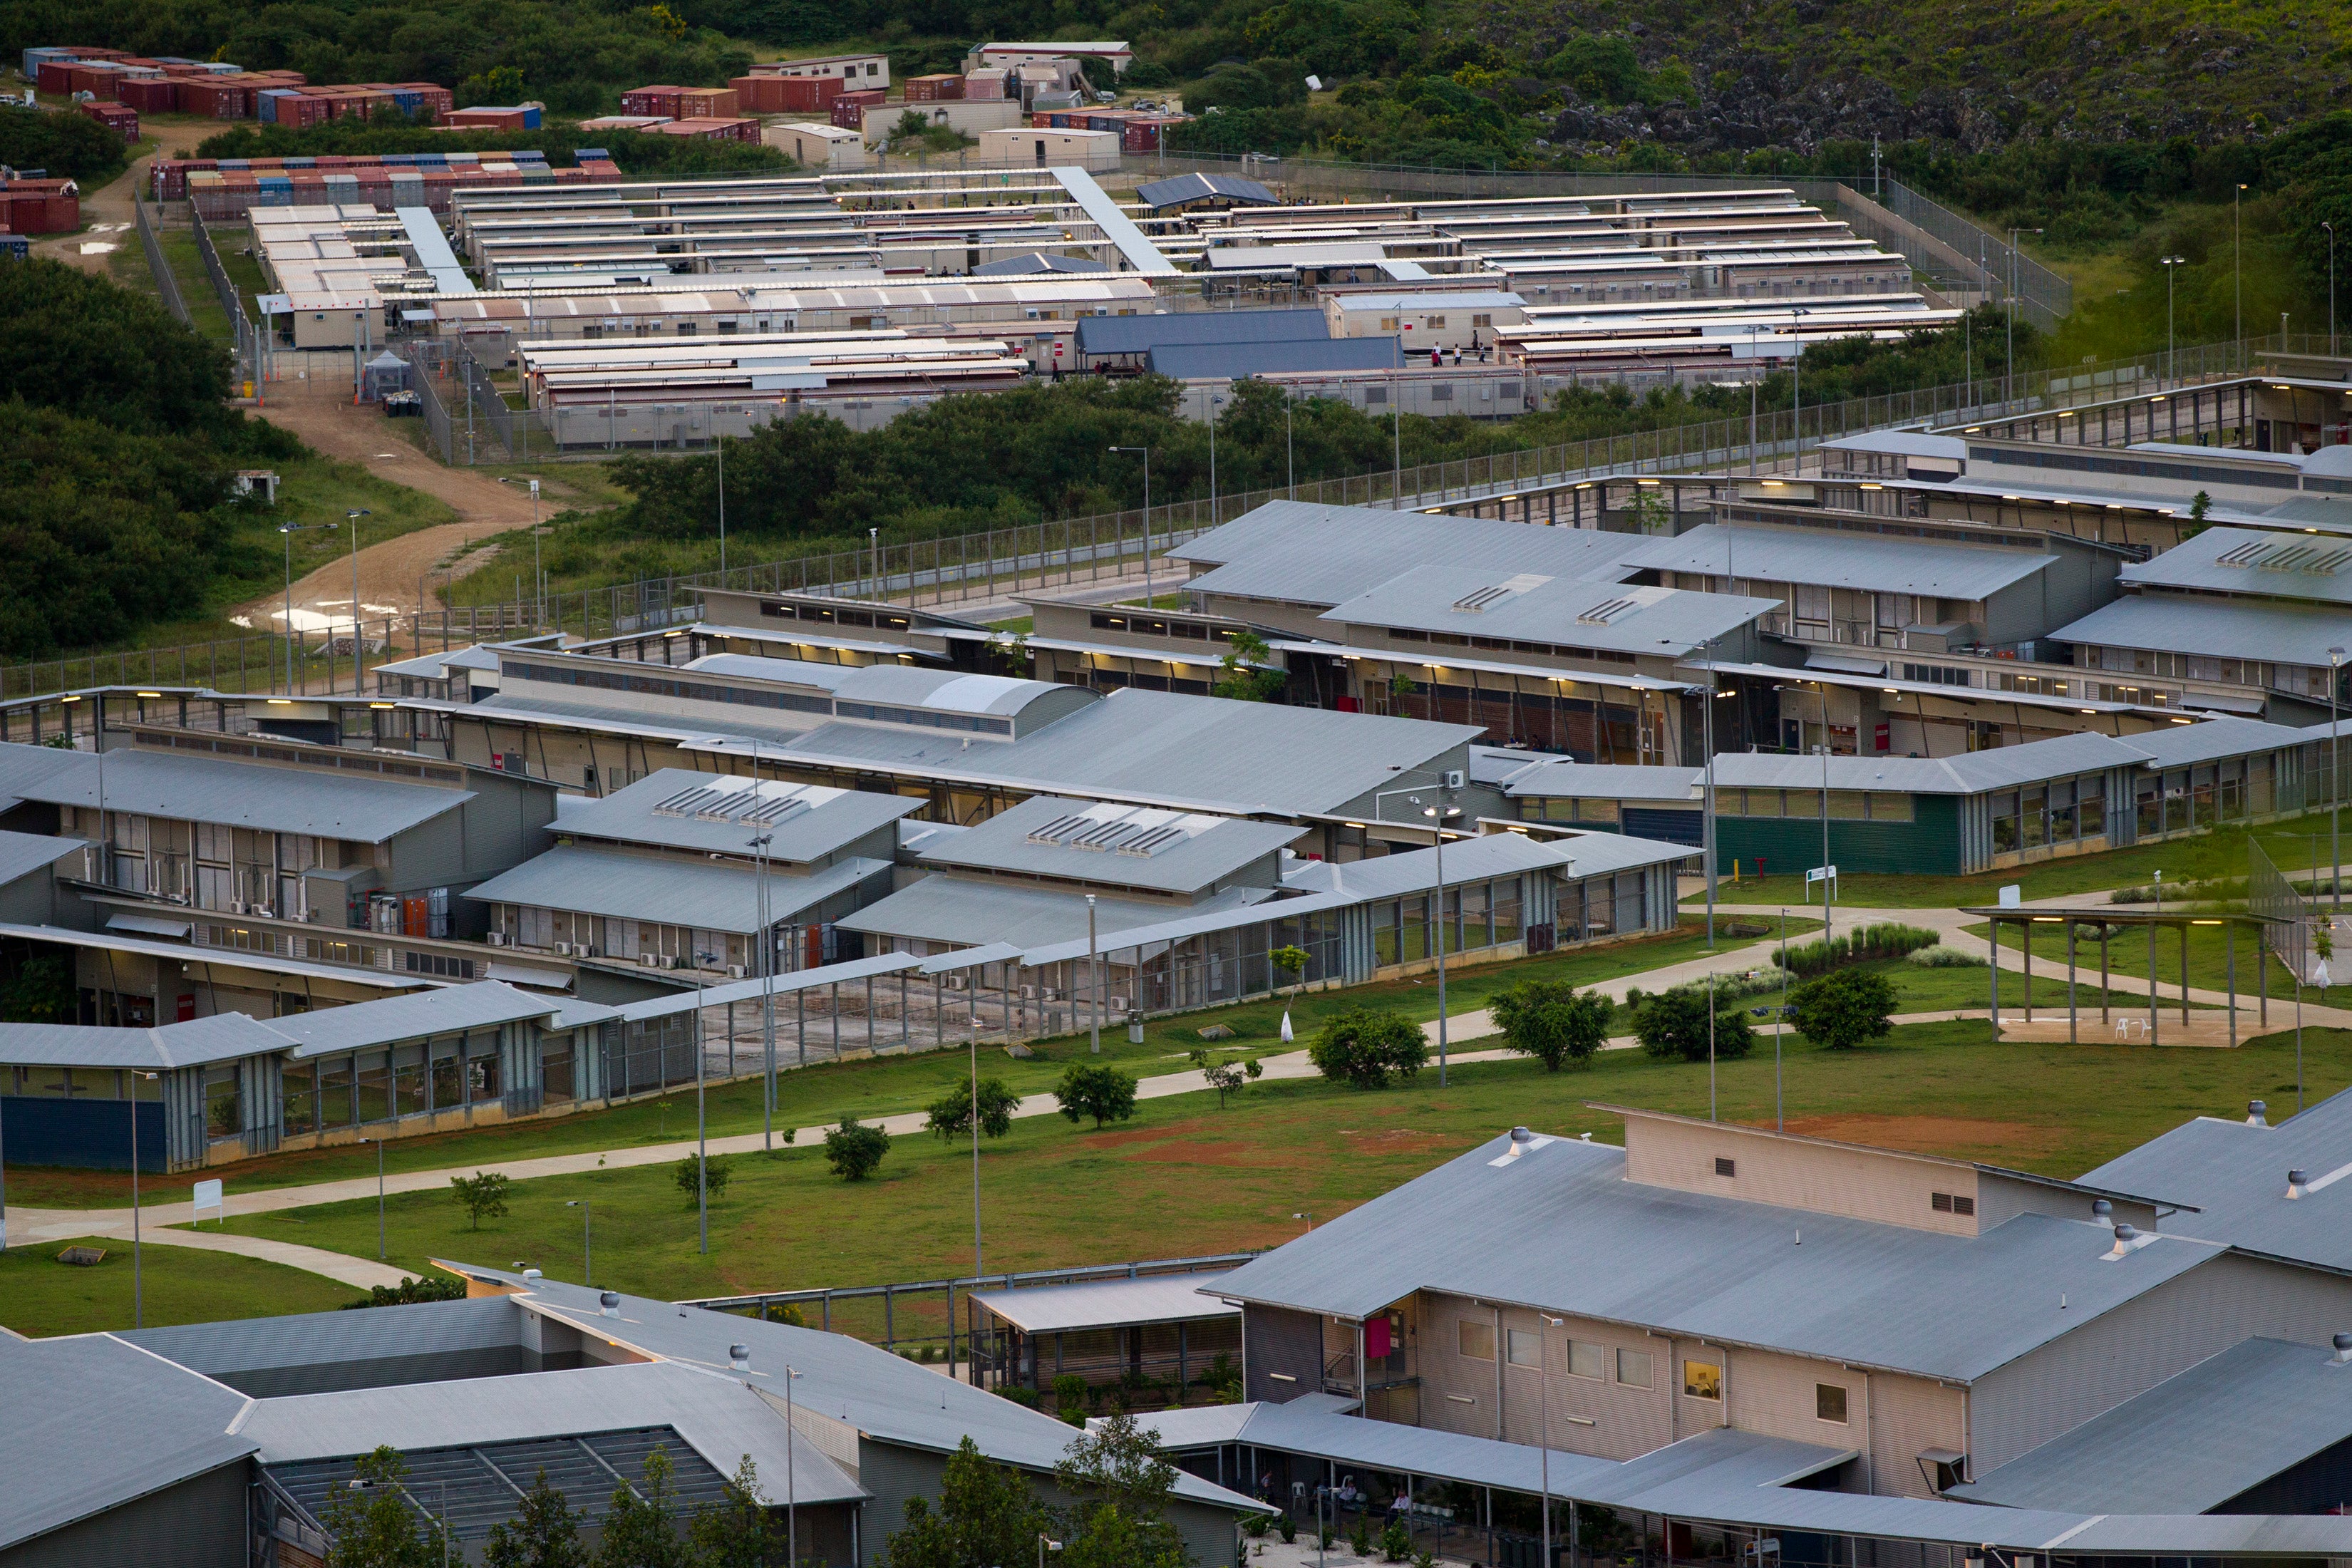 A view of the Immigration Detention Center (IDC) in February 2012 on Christmas Island, Australia